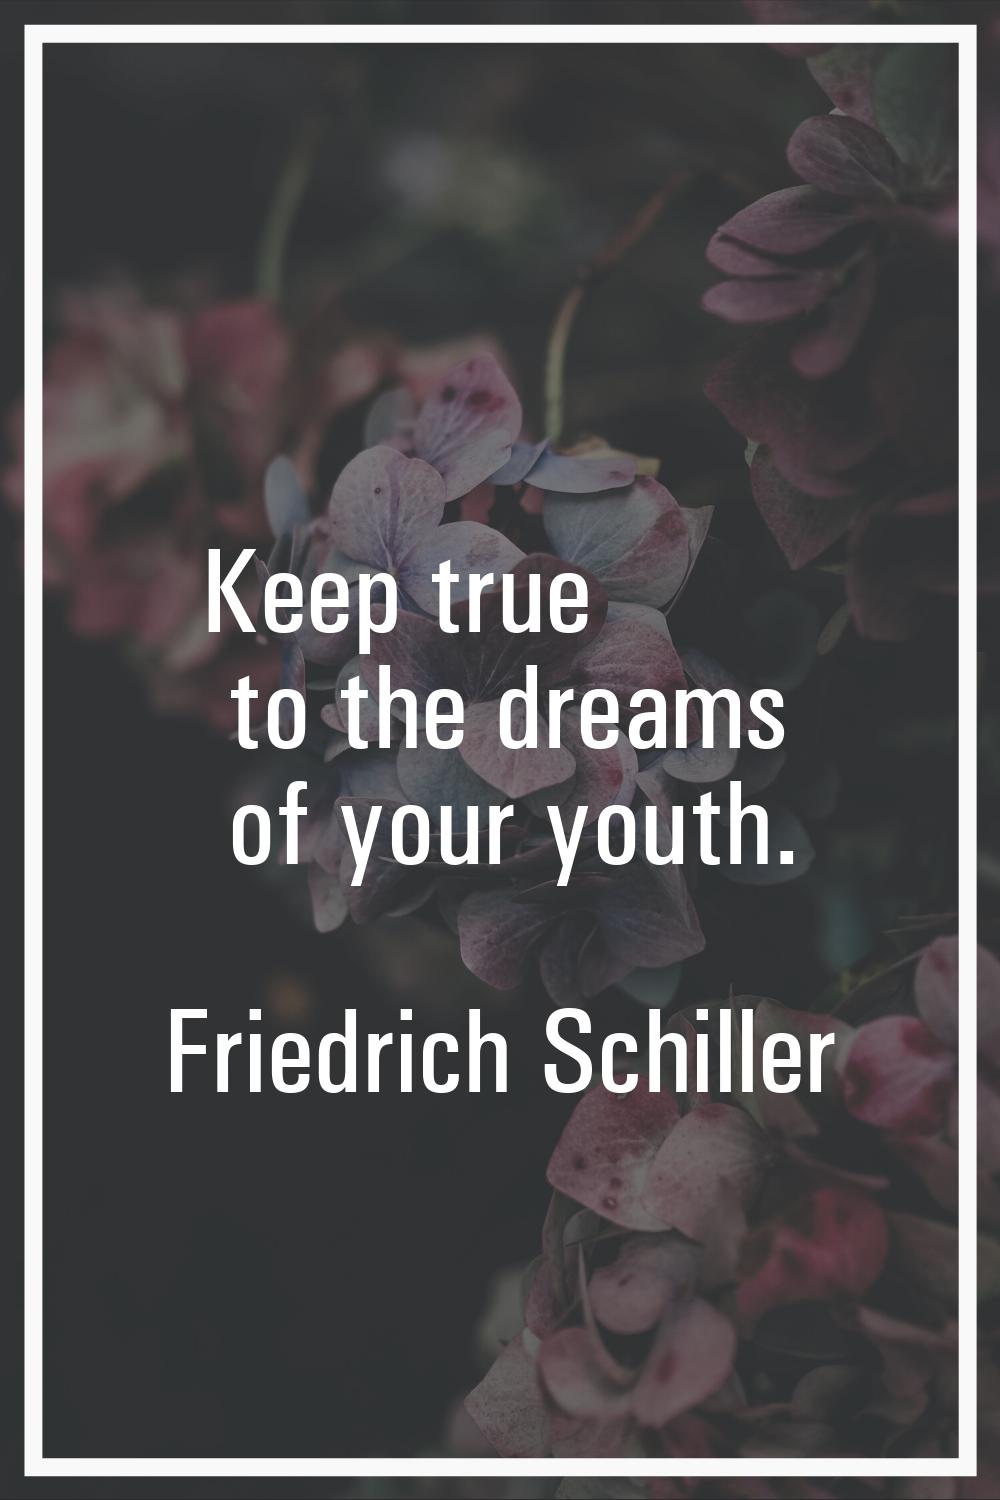 Keep true to the dreams of your youth.